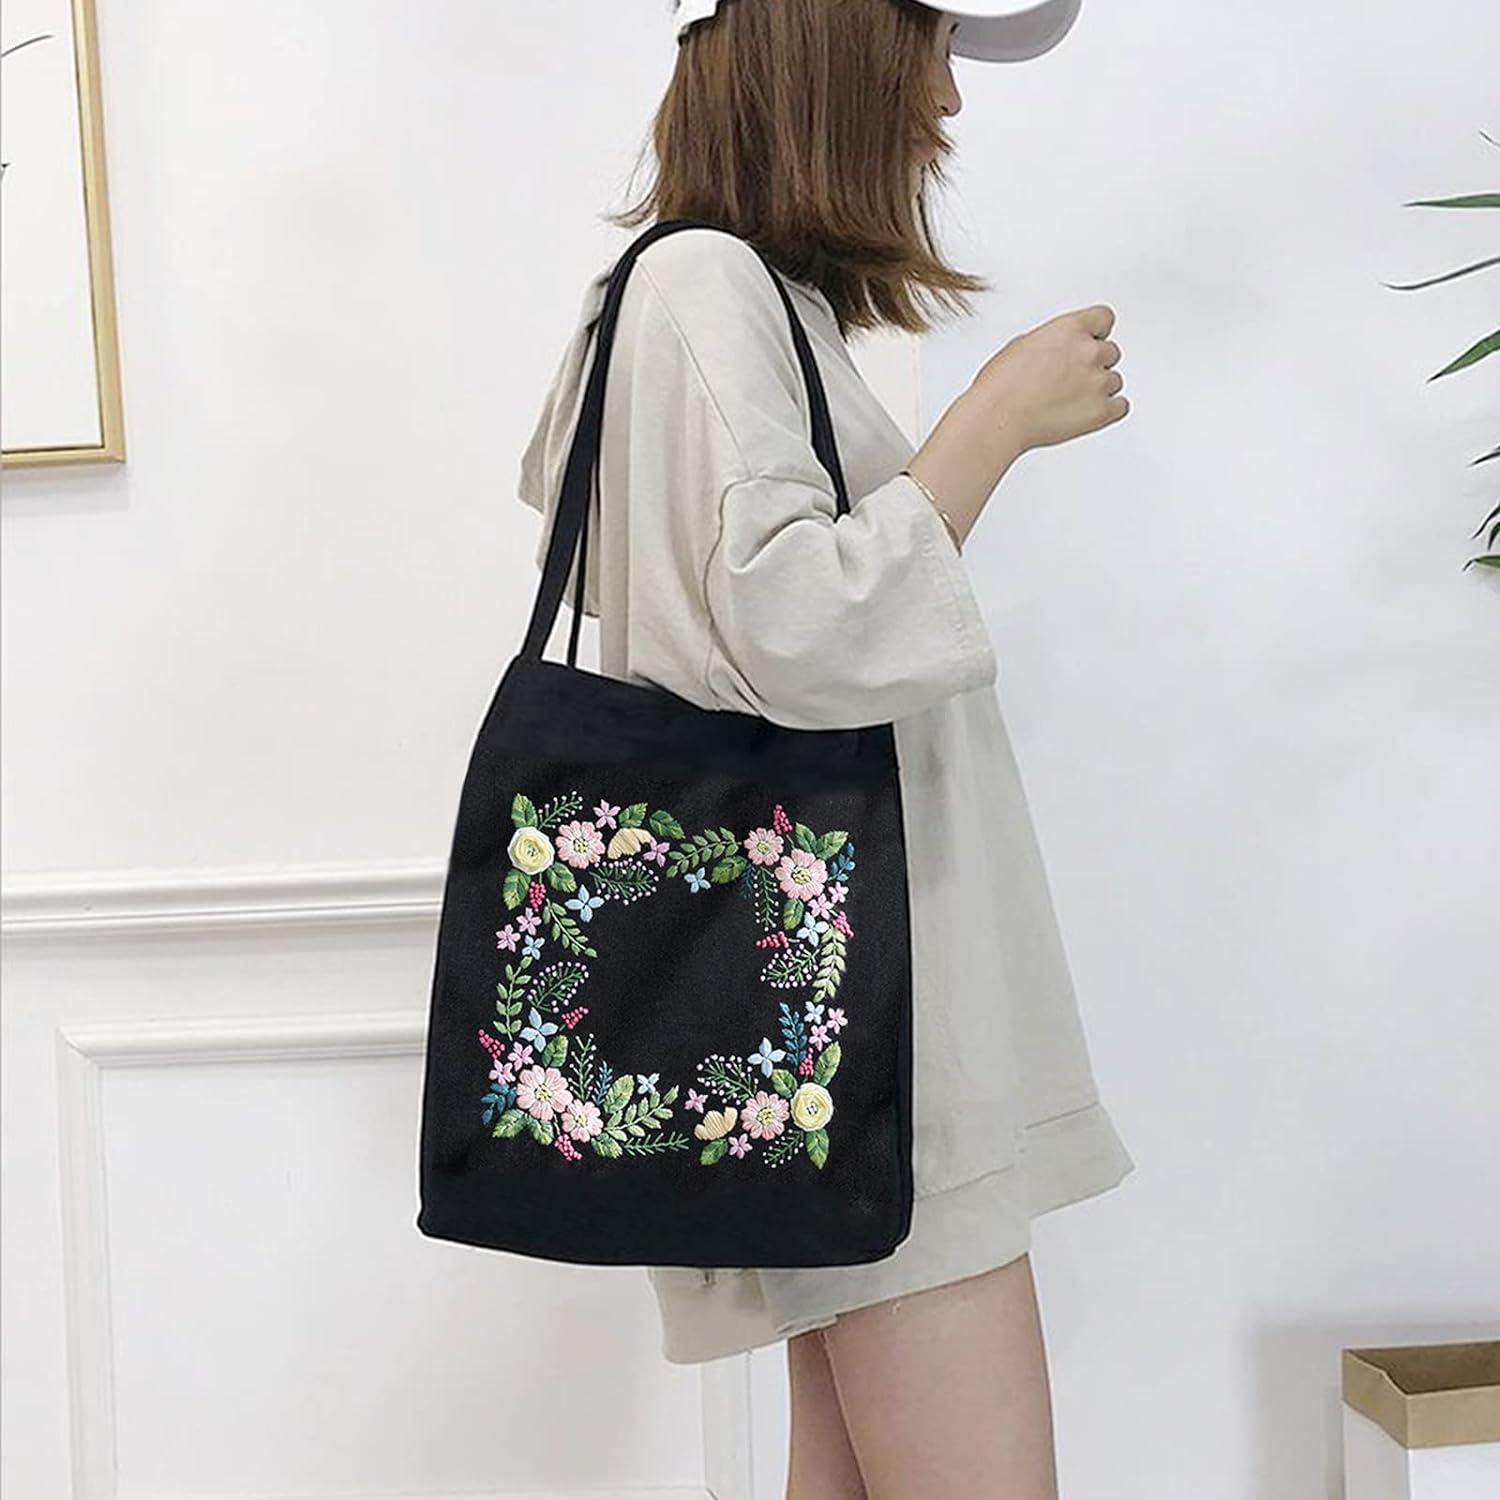  bunquax Black Canvas Tote Bag Embroidery Kit for Beginners,  with Pattern and Instruction Include Embroidery Bag with Flower Pattern,  Bamboo Embroidery Hoops, Color Threads and Tool (Black)